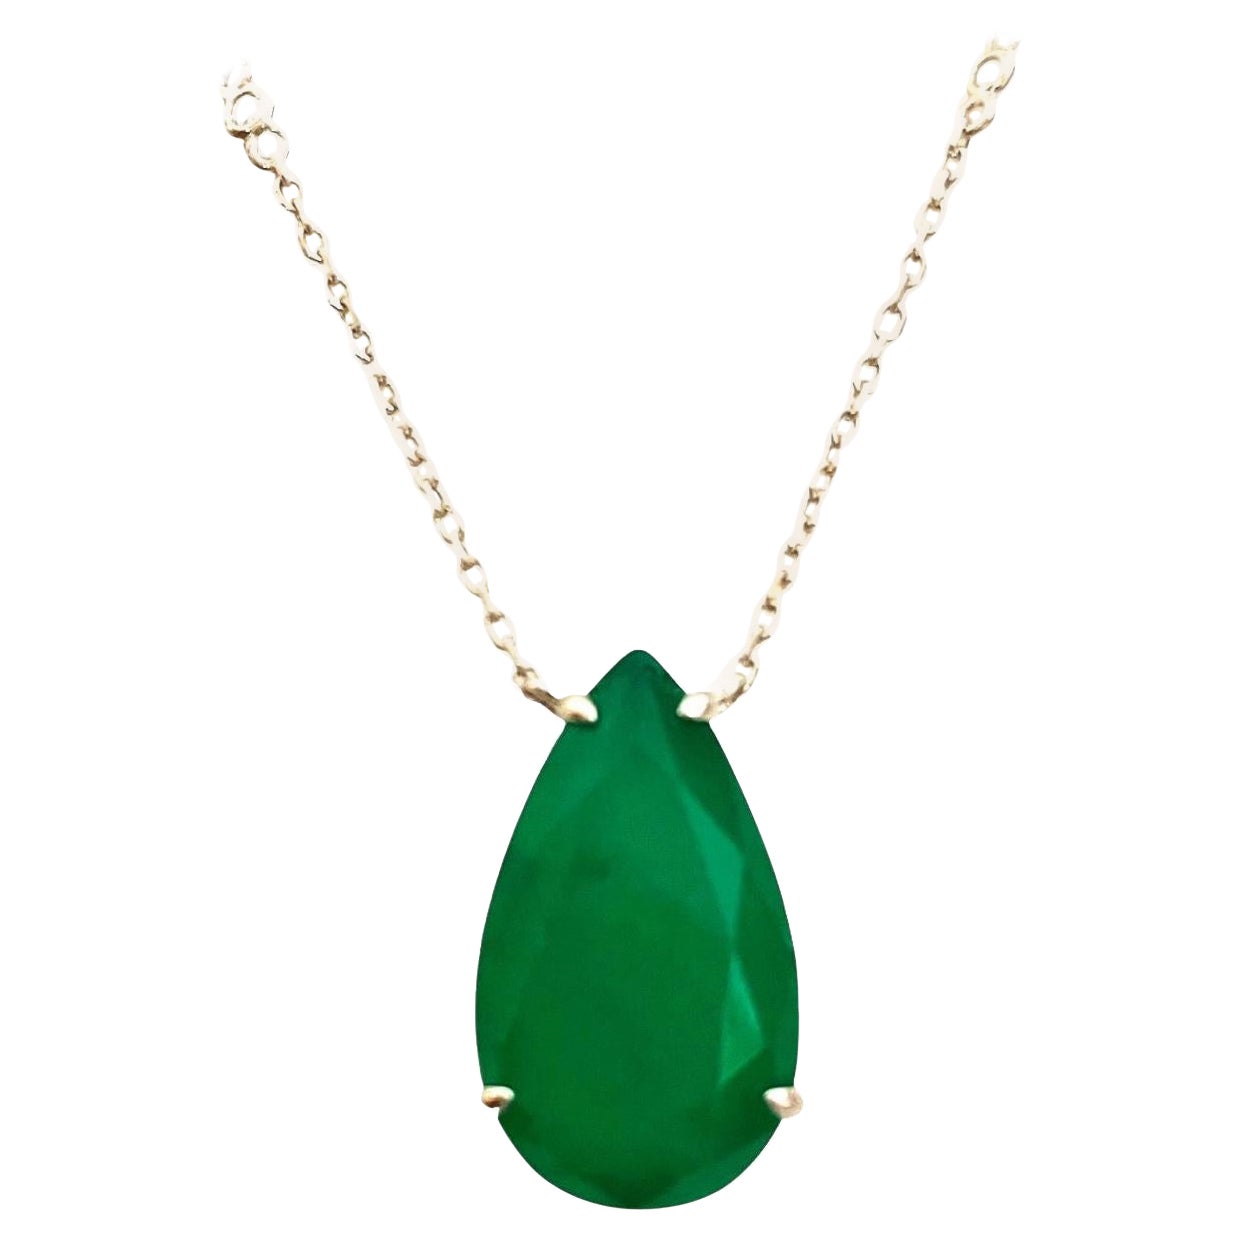 New Natural Forest Green Aventurine Doublet Sterling Necklace and Pendant